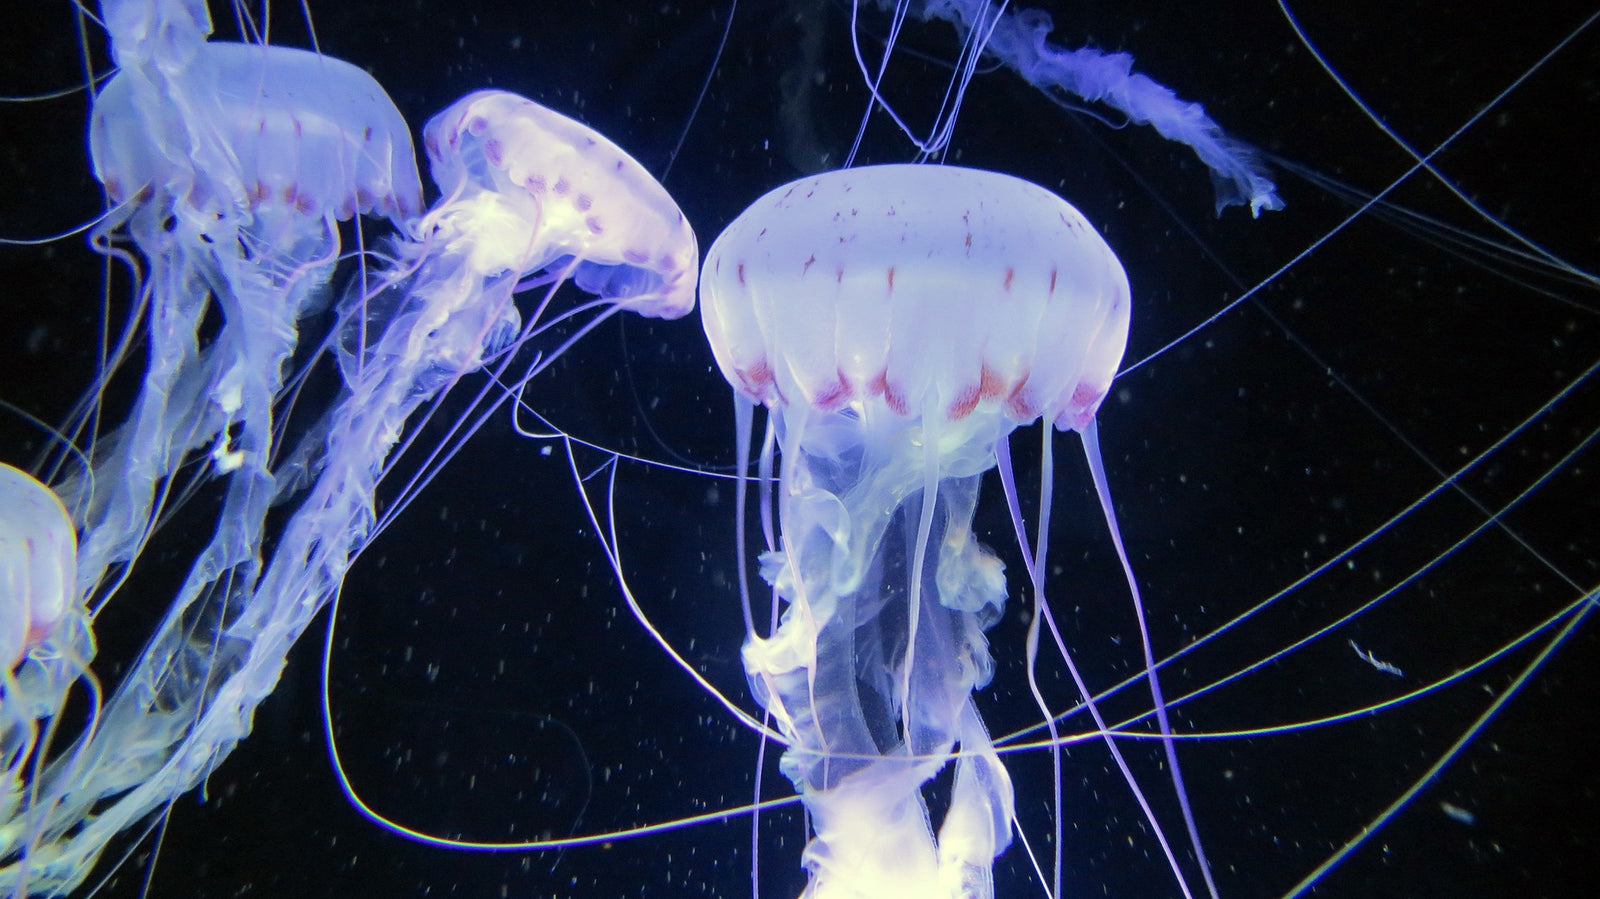 It’s that time of the year again – the jelly fish are coming.